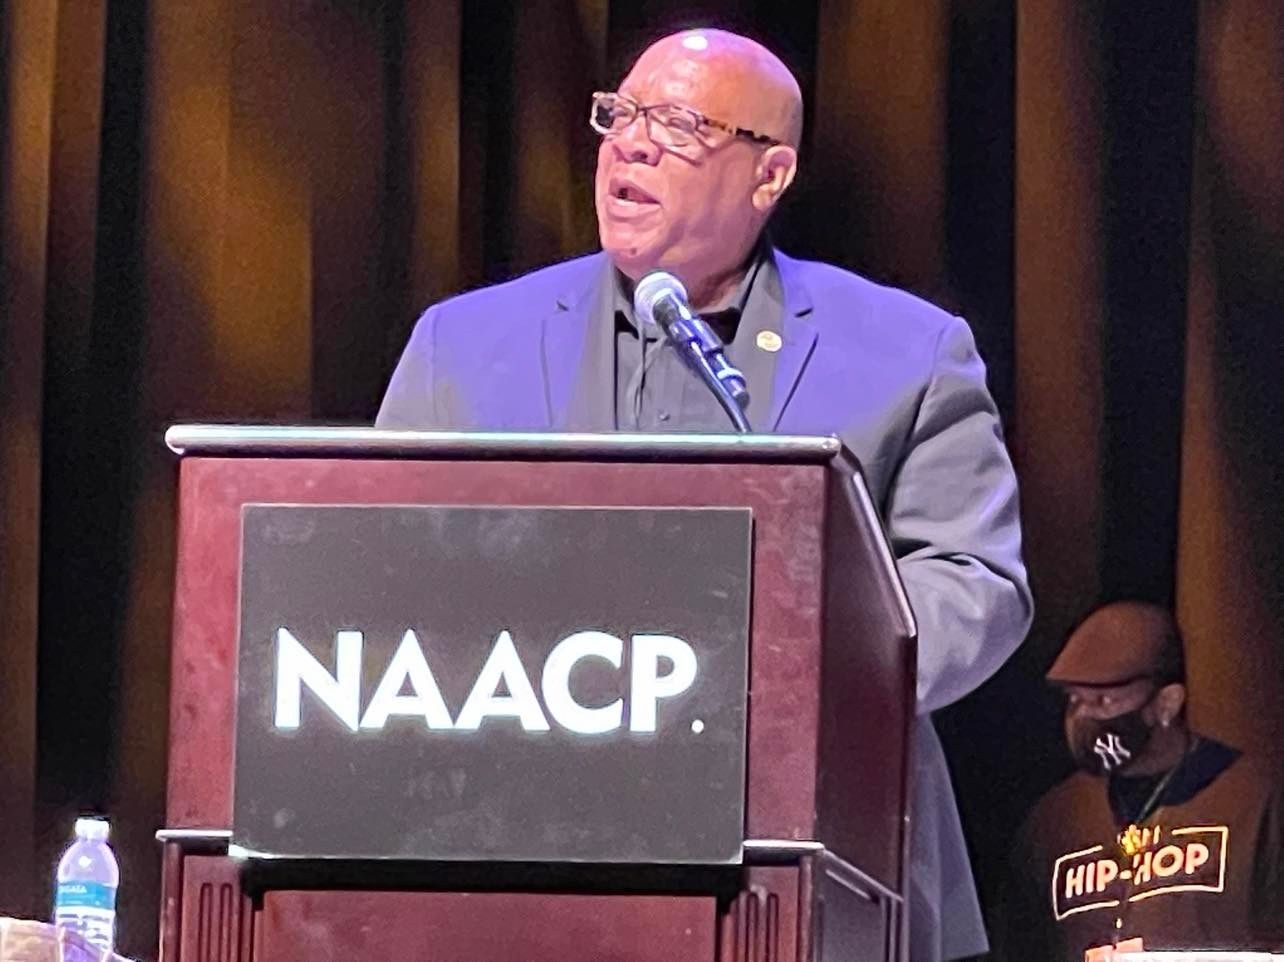 Scot X. Esdaile, NAACP Connecticut State Conference President is also a member of the Hip-Hop Alliance. Photo Credit:  Mark Tyler